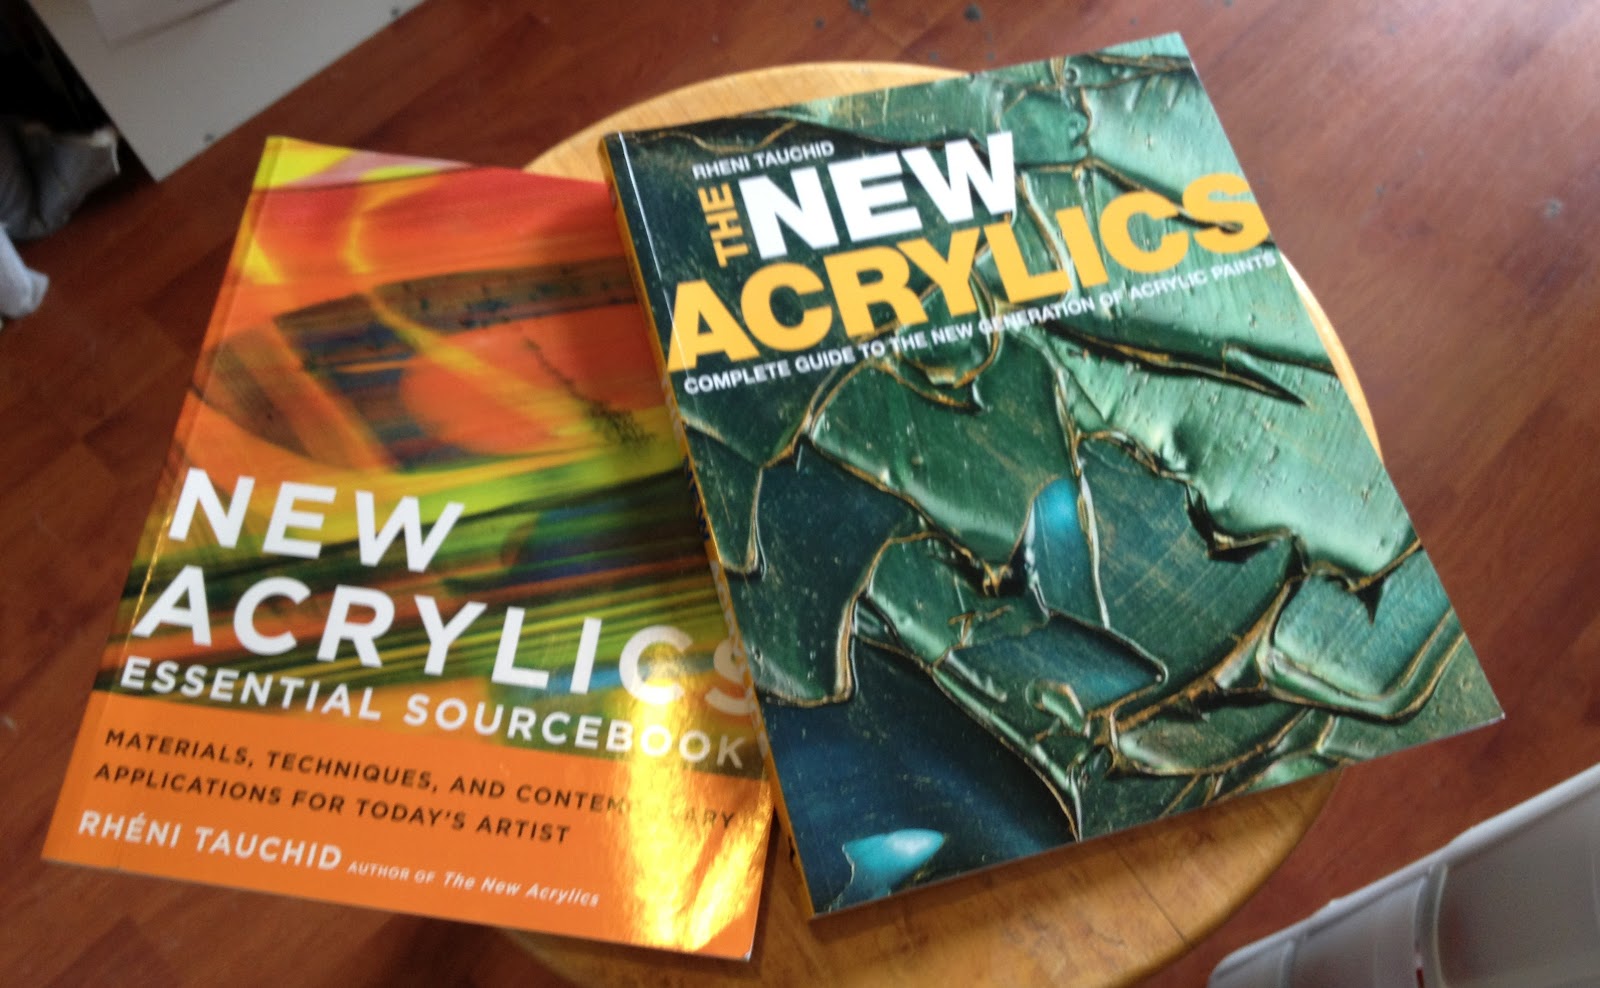 The New Acrylics Complete Guide to the New Generation of Acrylic Paints